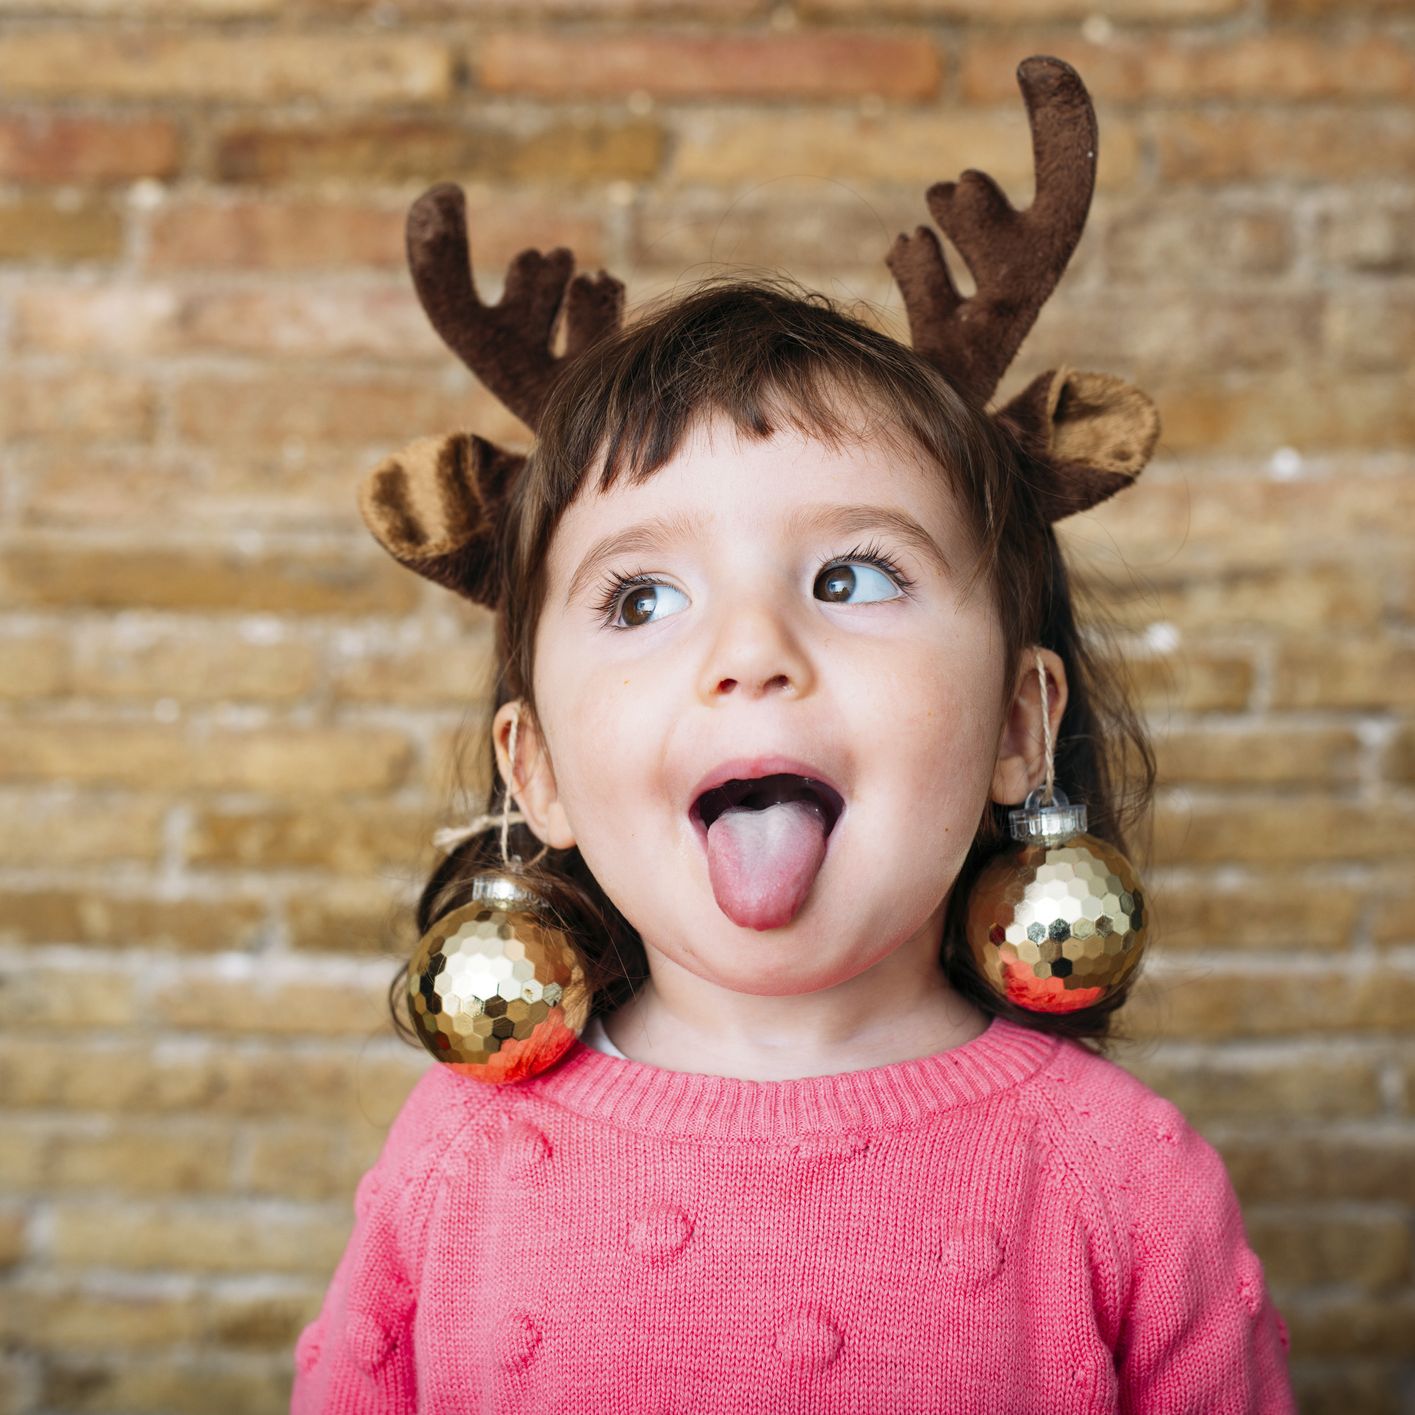 These Funny Christmas Jokes Will Keep the Family Laughing All Season Long